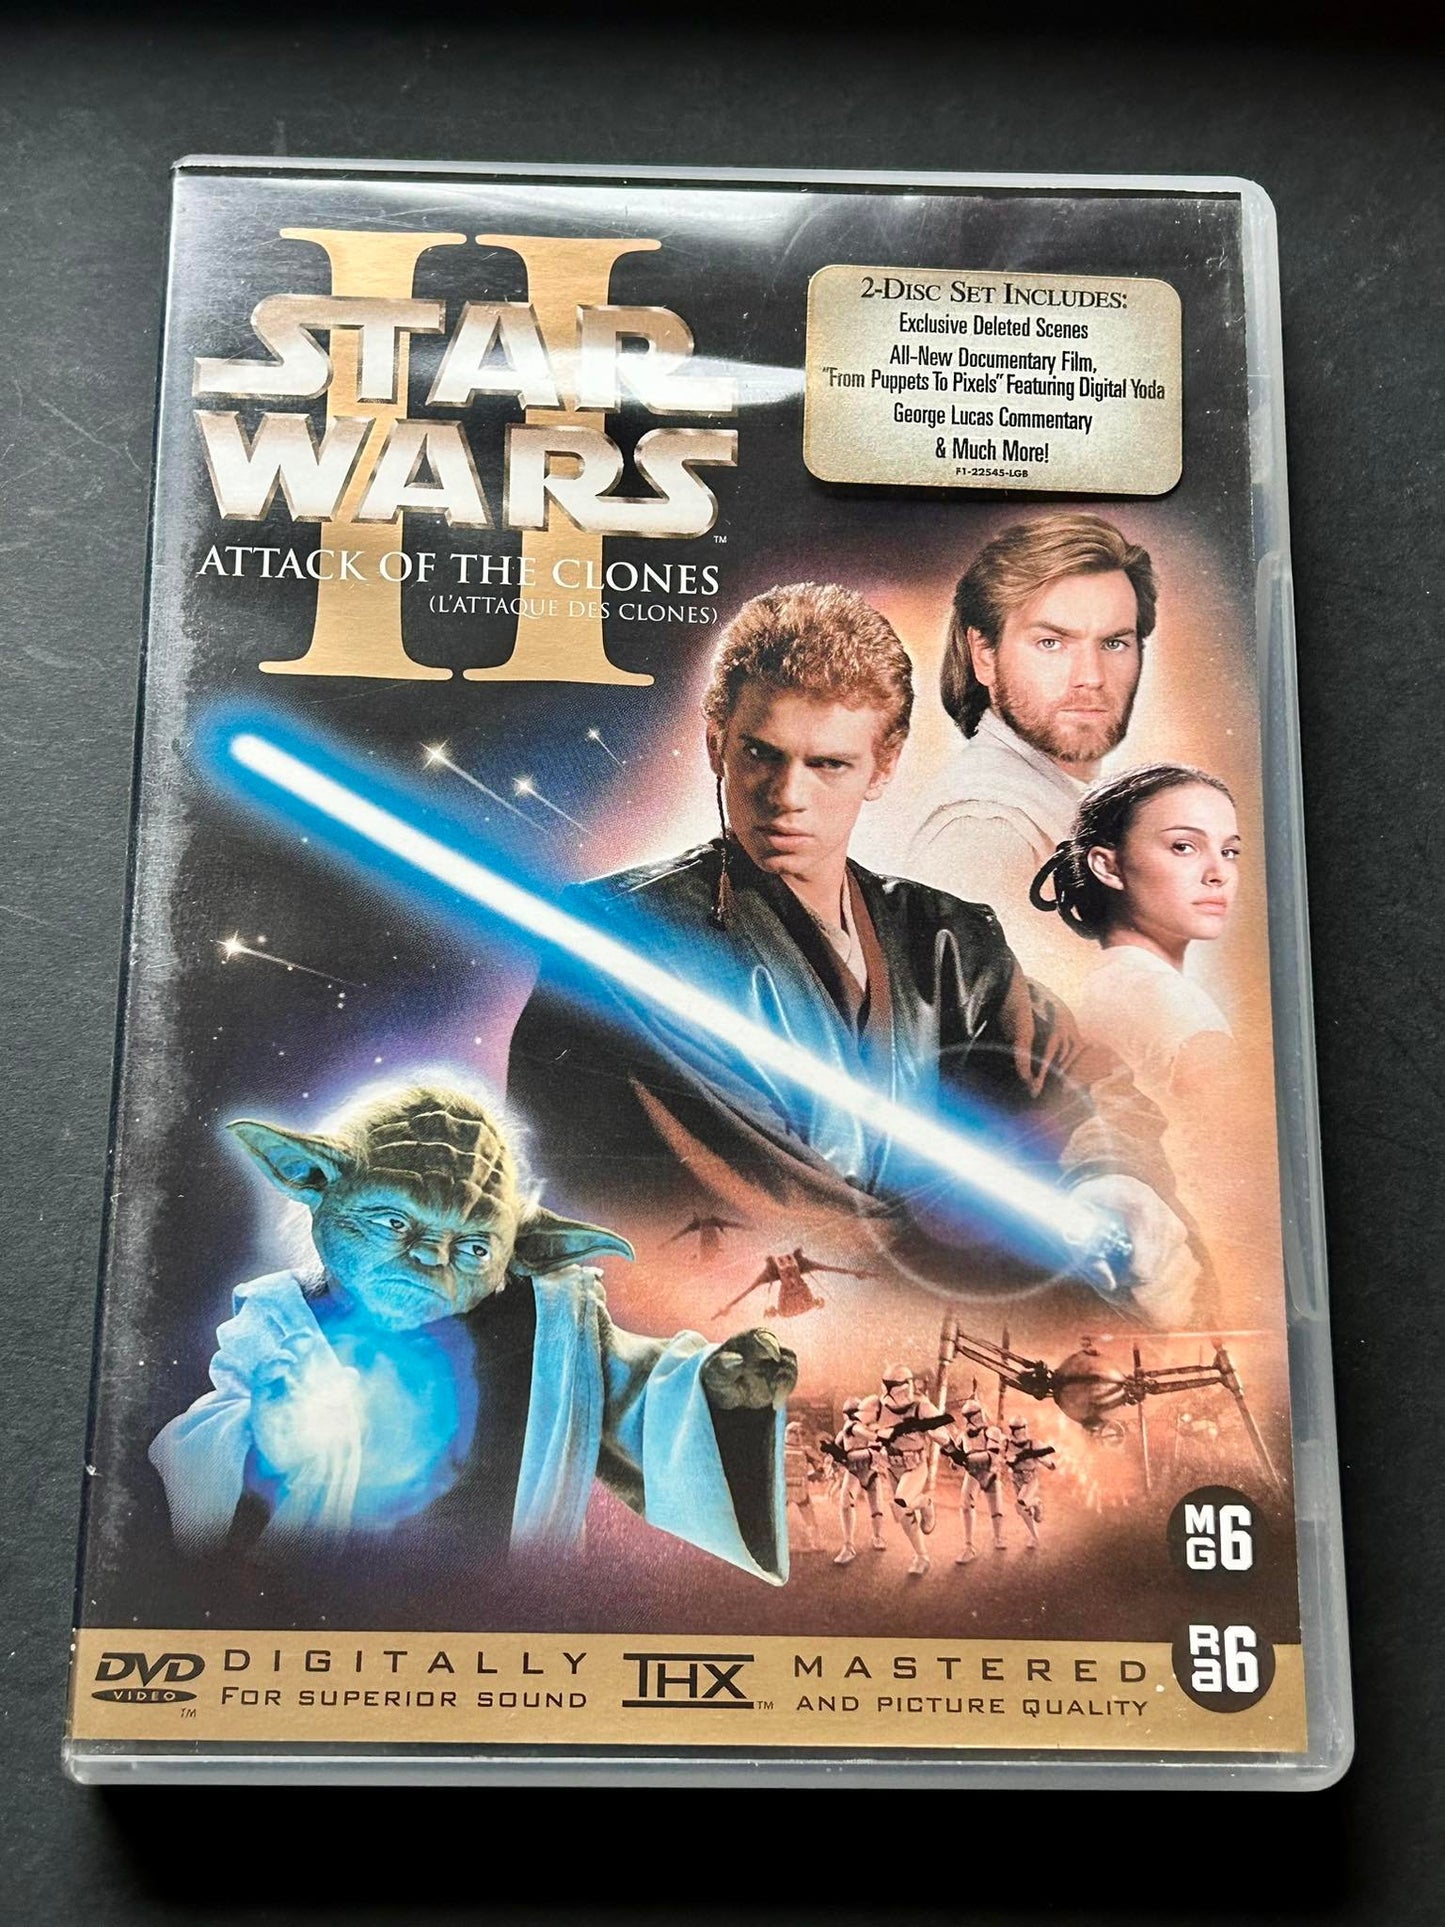 DvD Star Wars: Episode II, attack of the clones - Edition 2 DVD